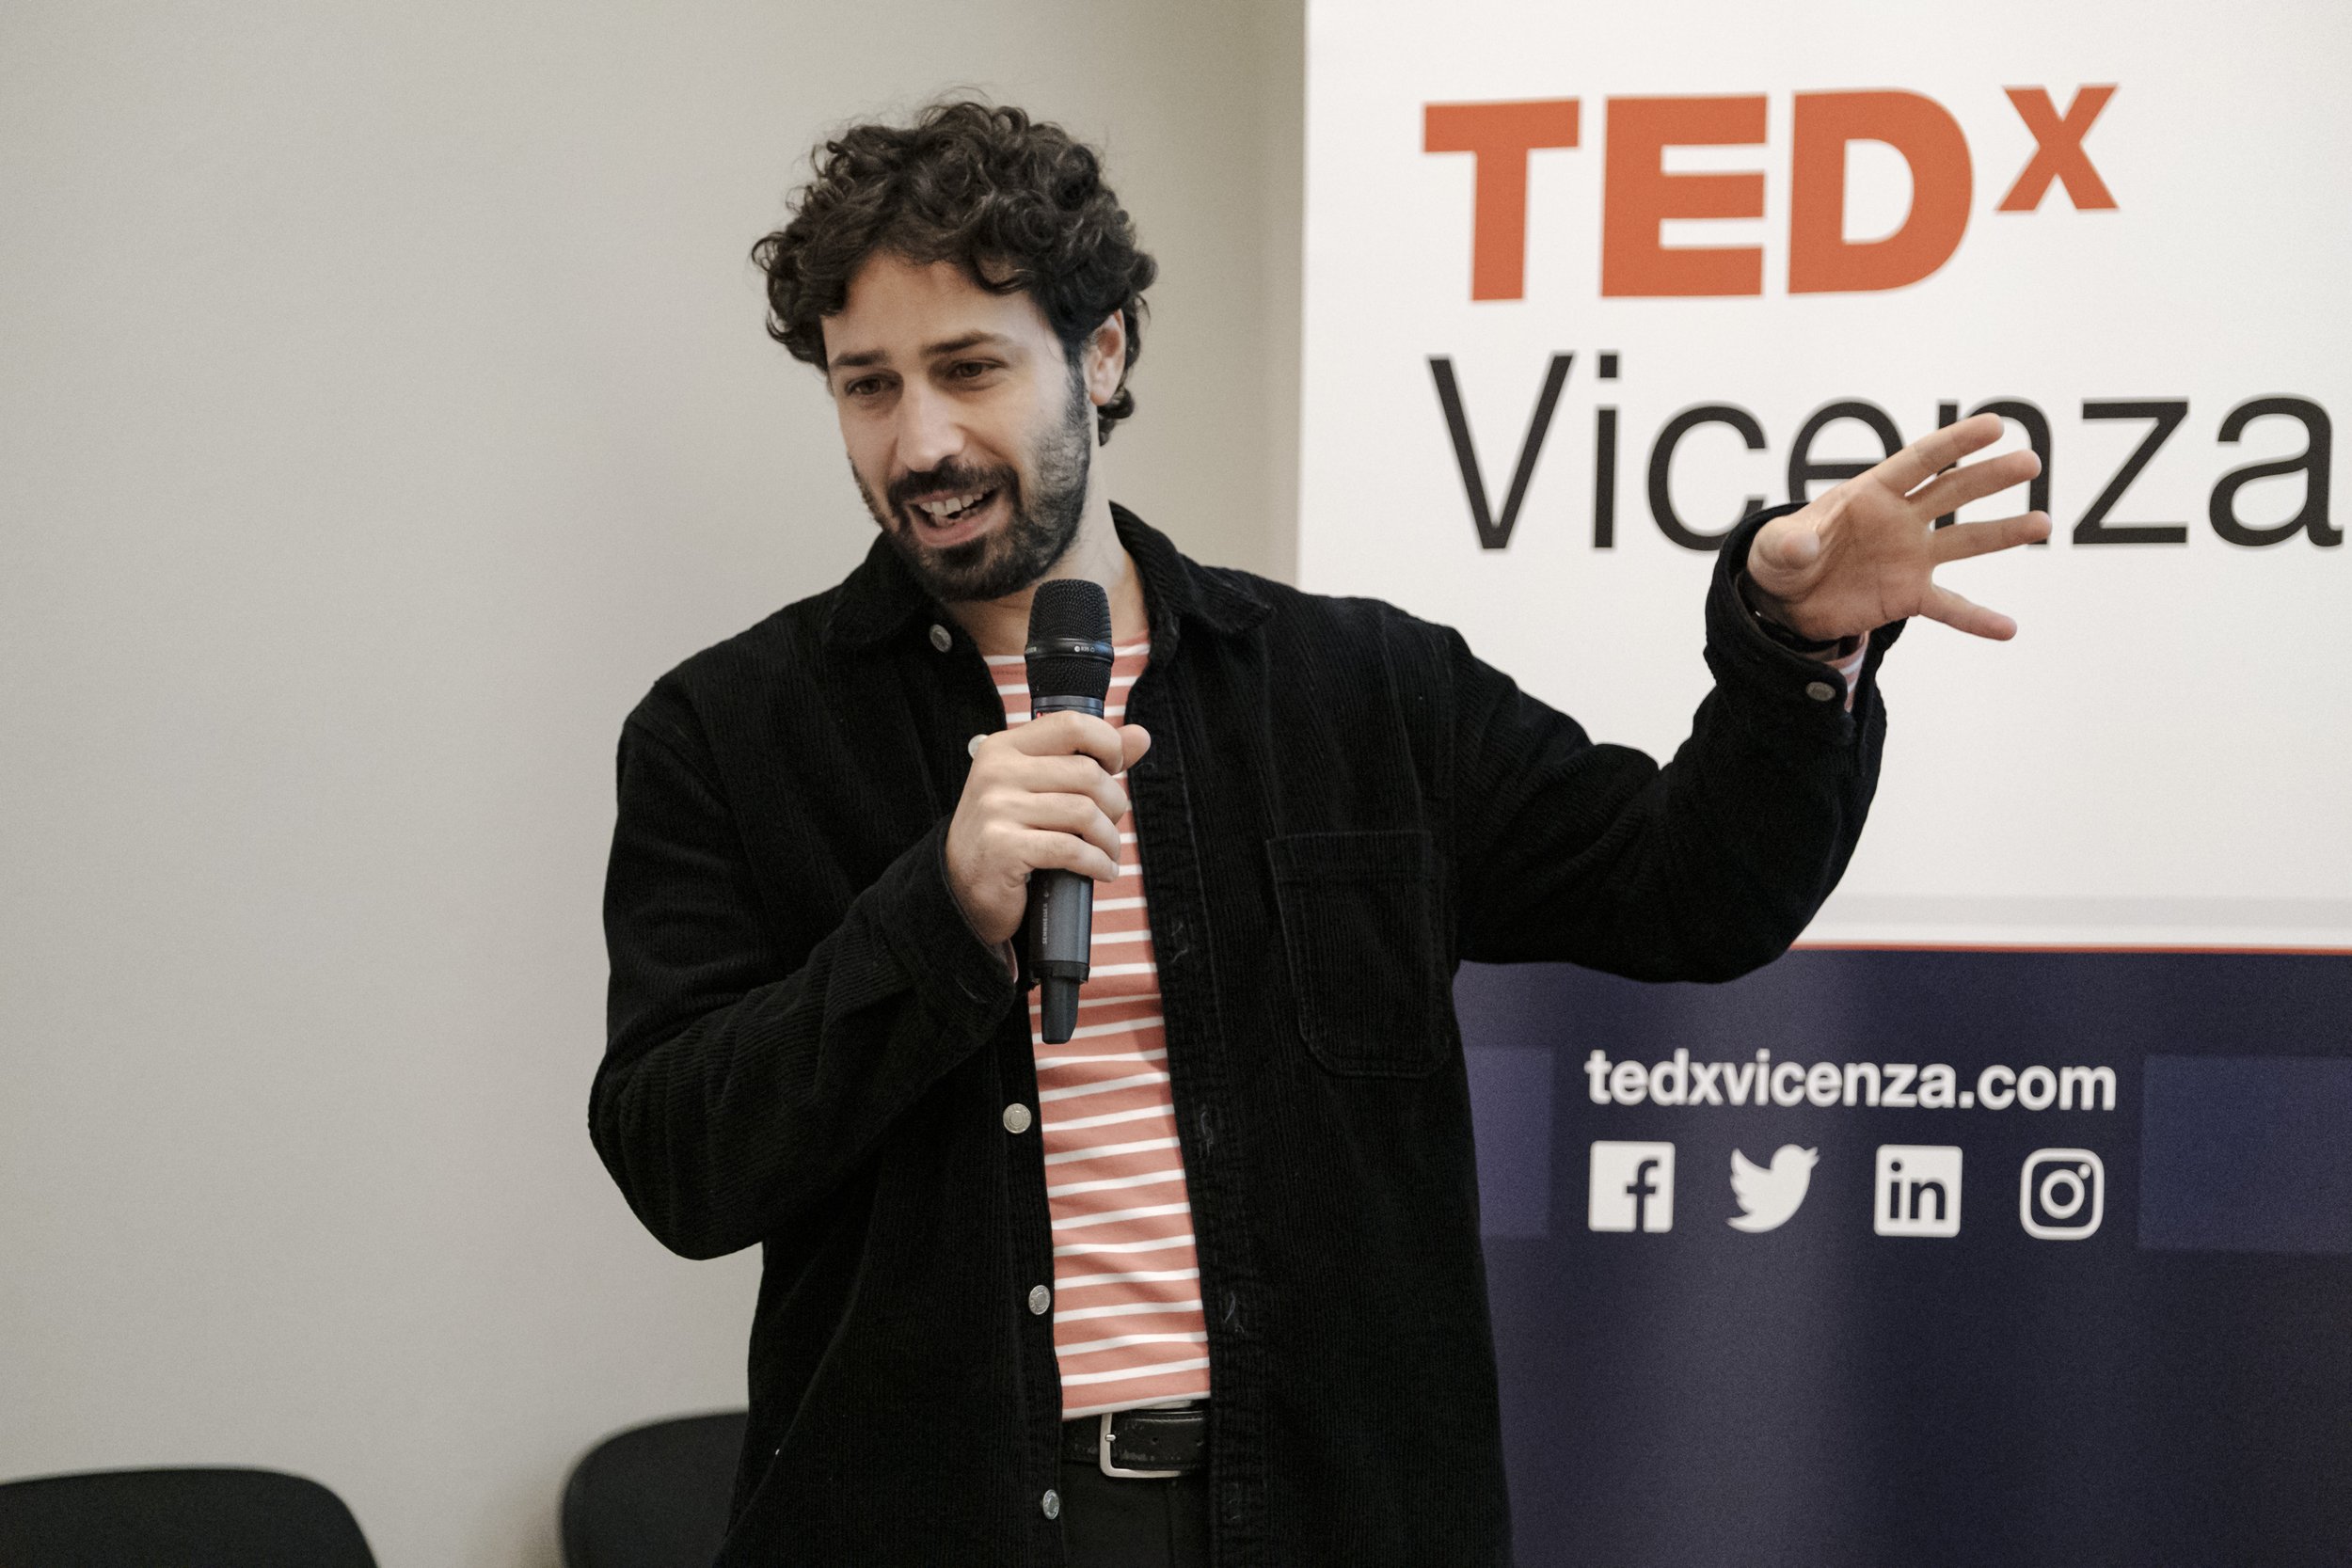 tedxvicenza--sprints-for-tedx-countdown_53331914161_o.jpg